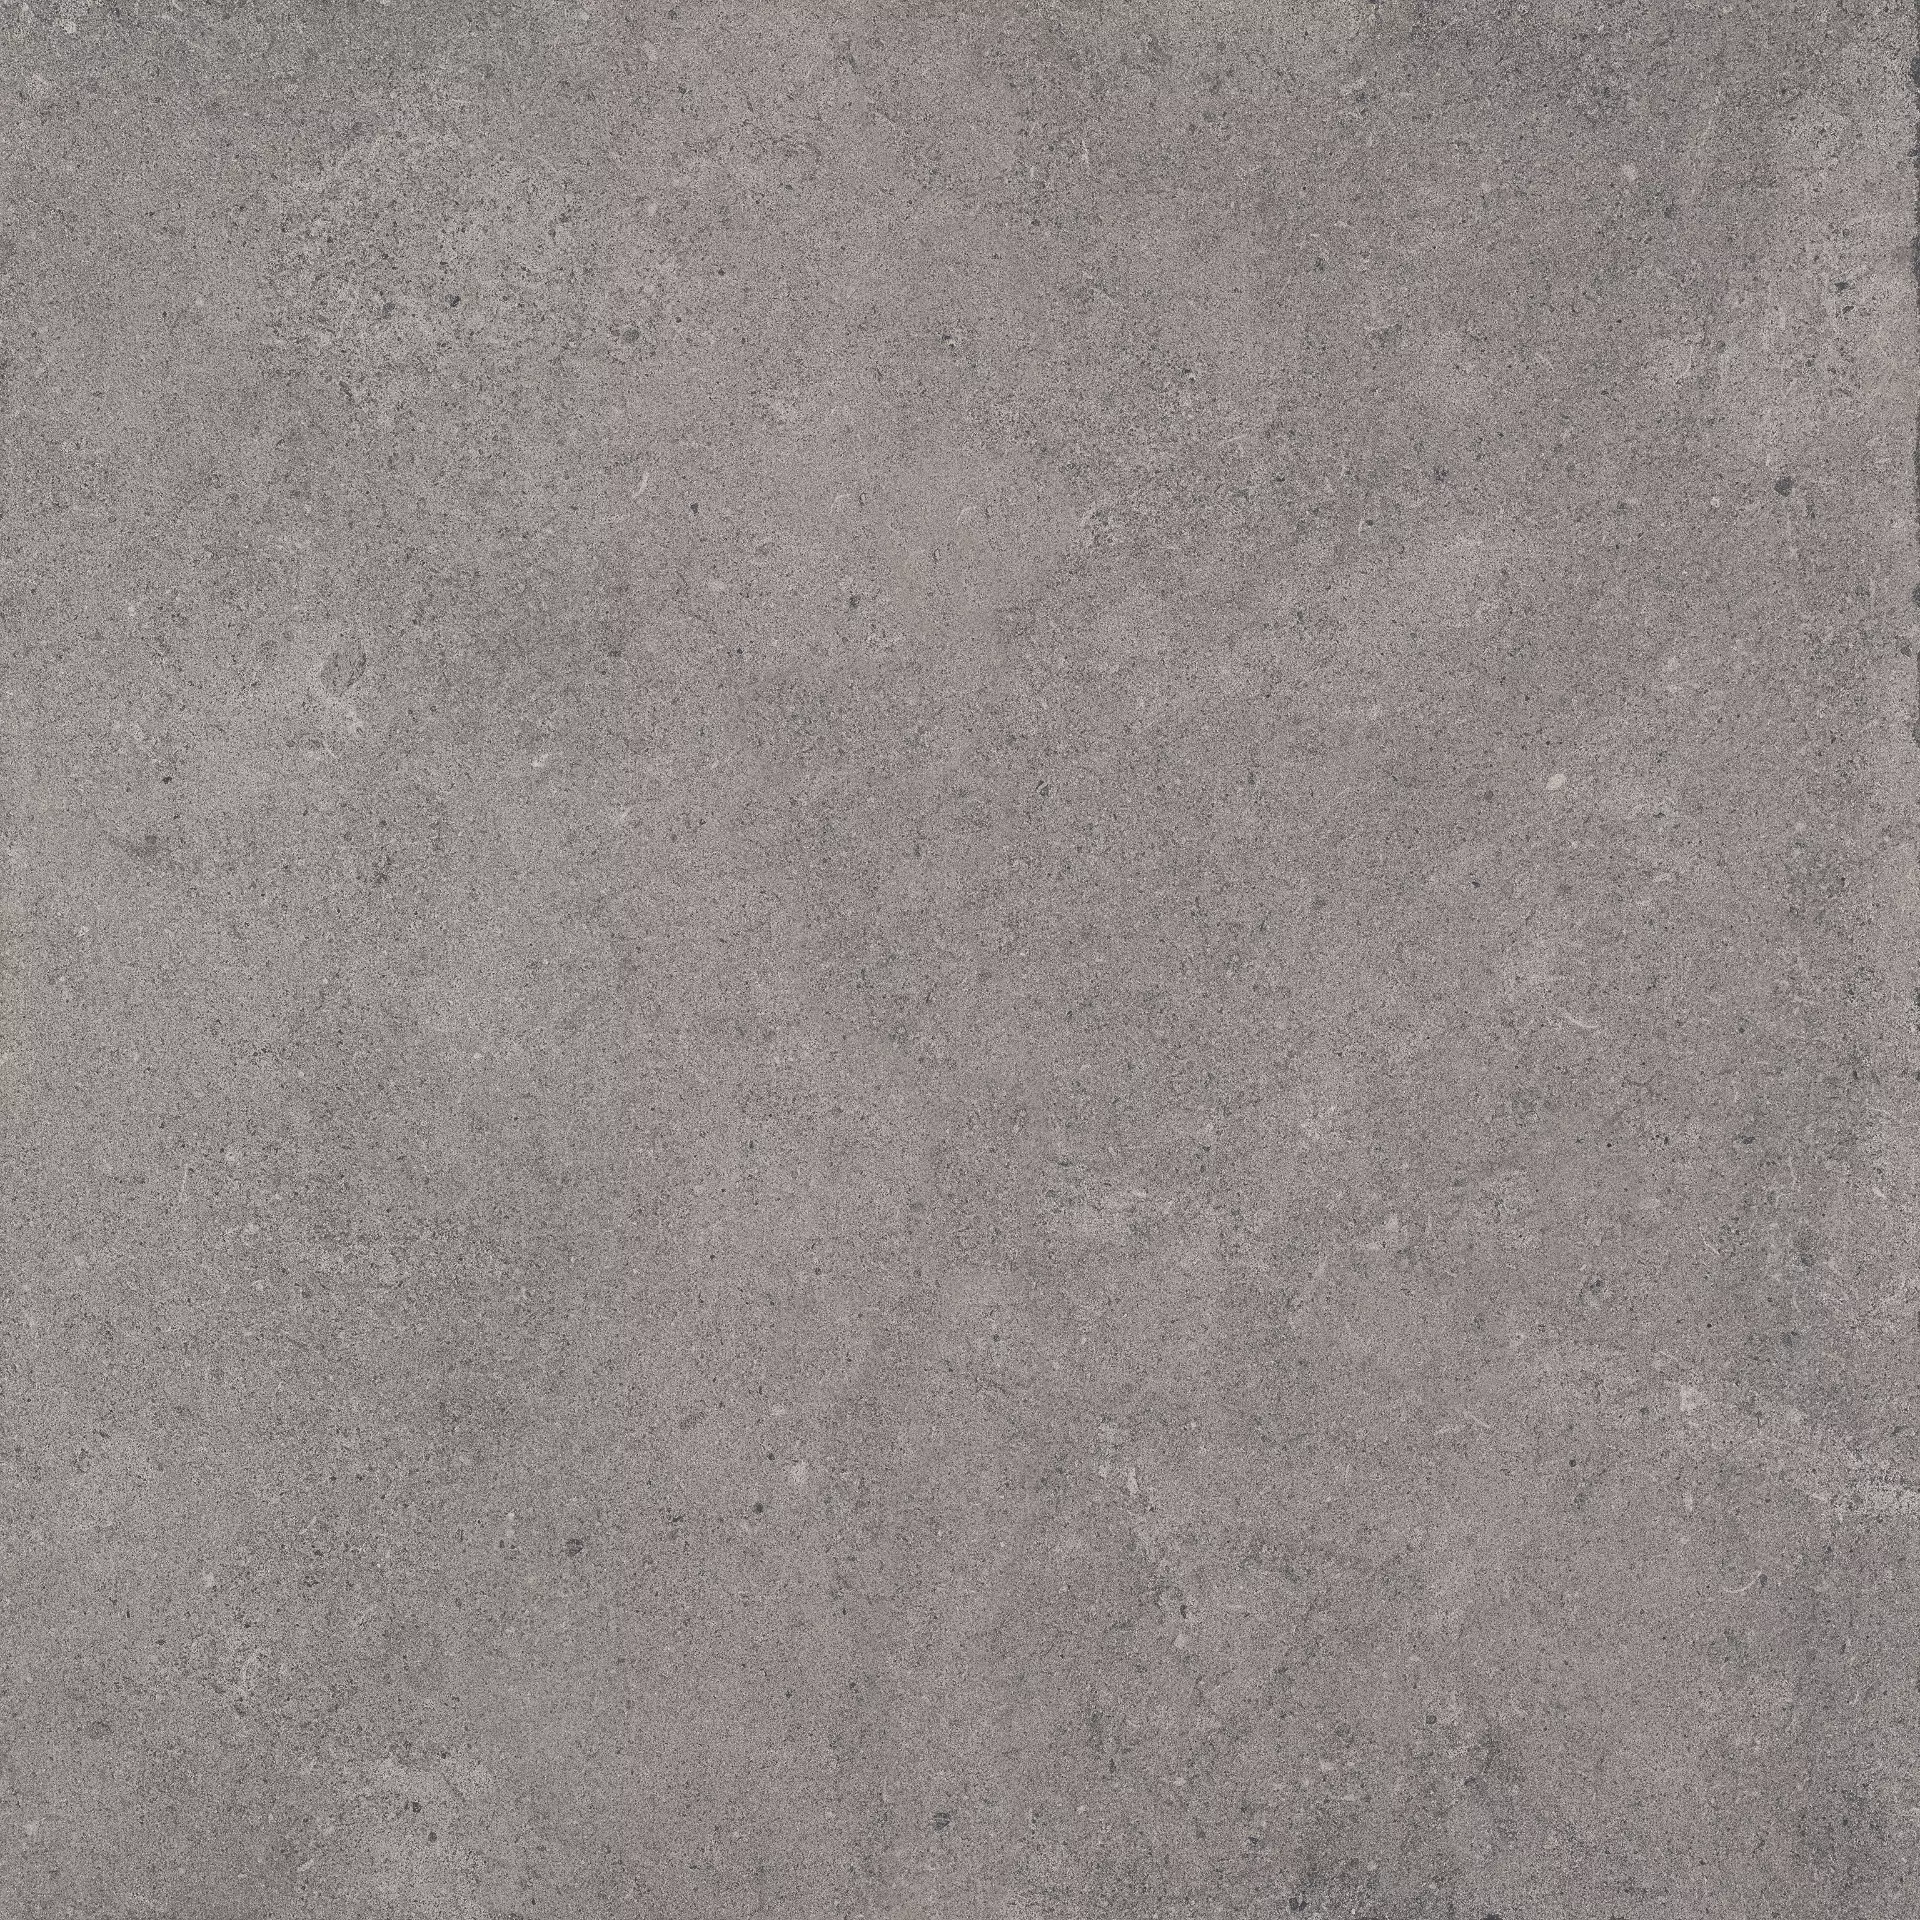 Sant Agostino Highstone Grey Natural CSAH12GY12 120x120cm rectified 10mm